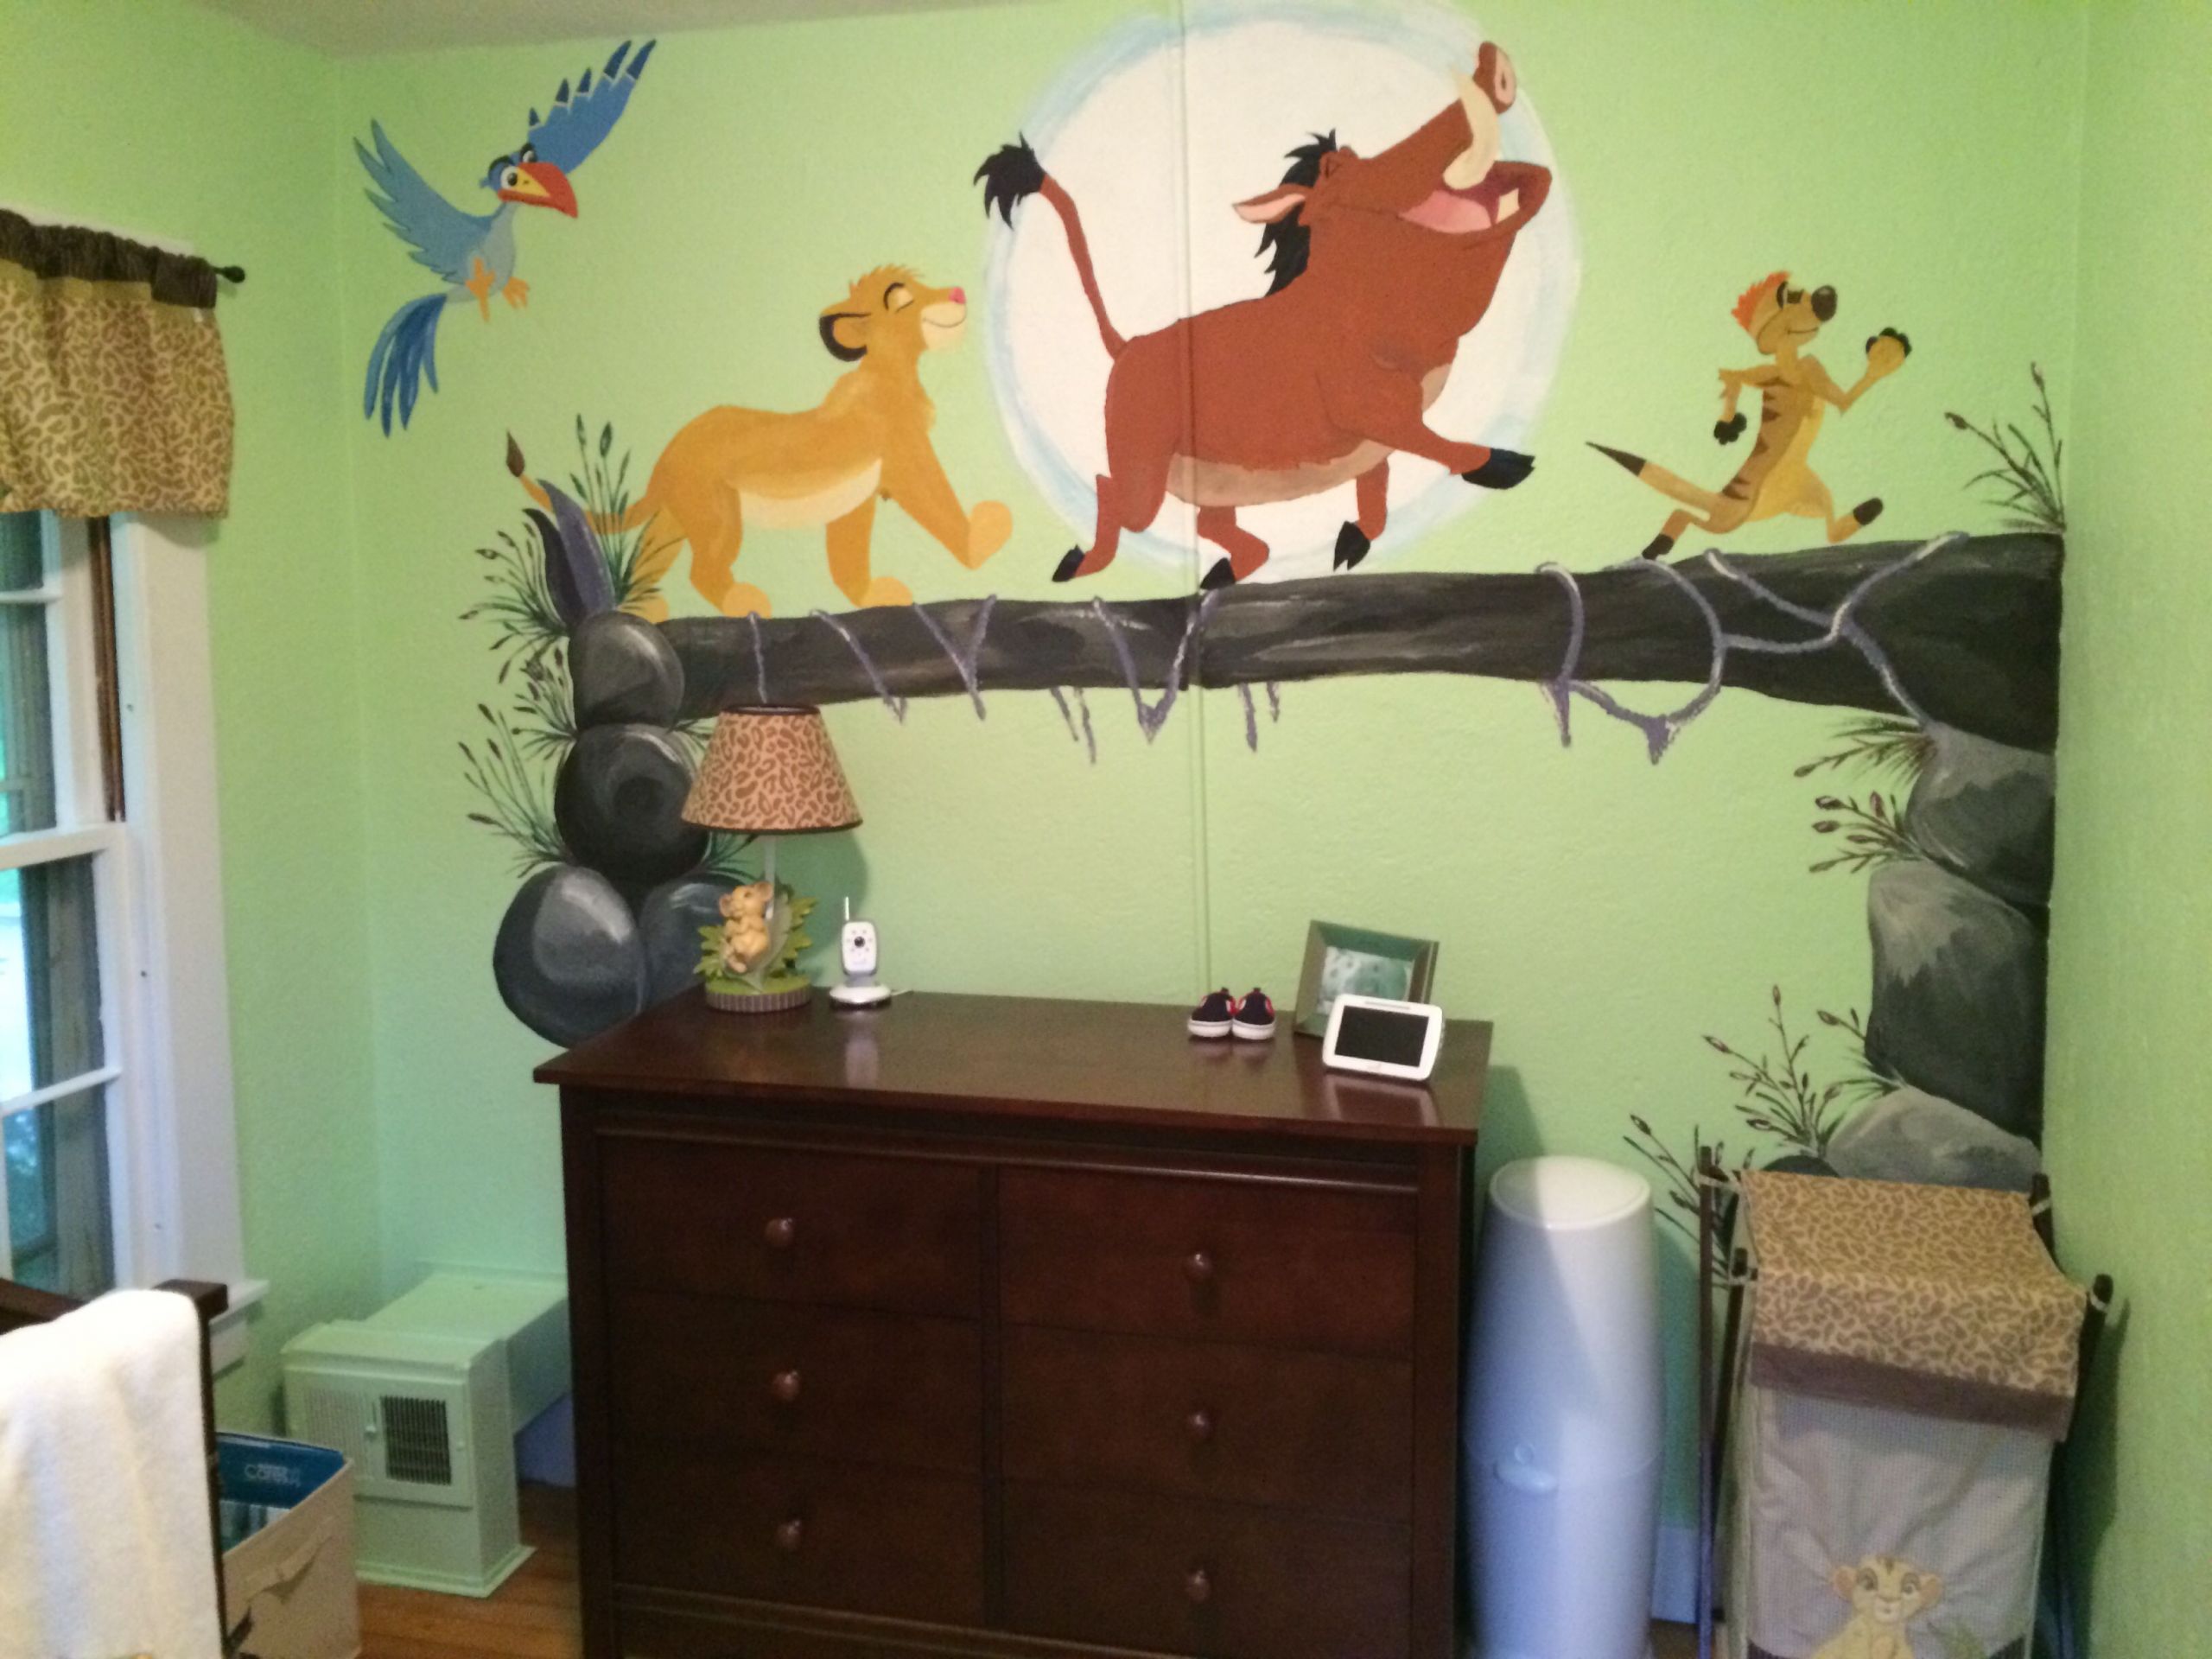 Lion King Baby Room Decor
 Our boys lion king themed room